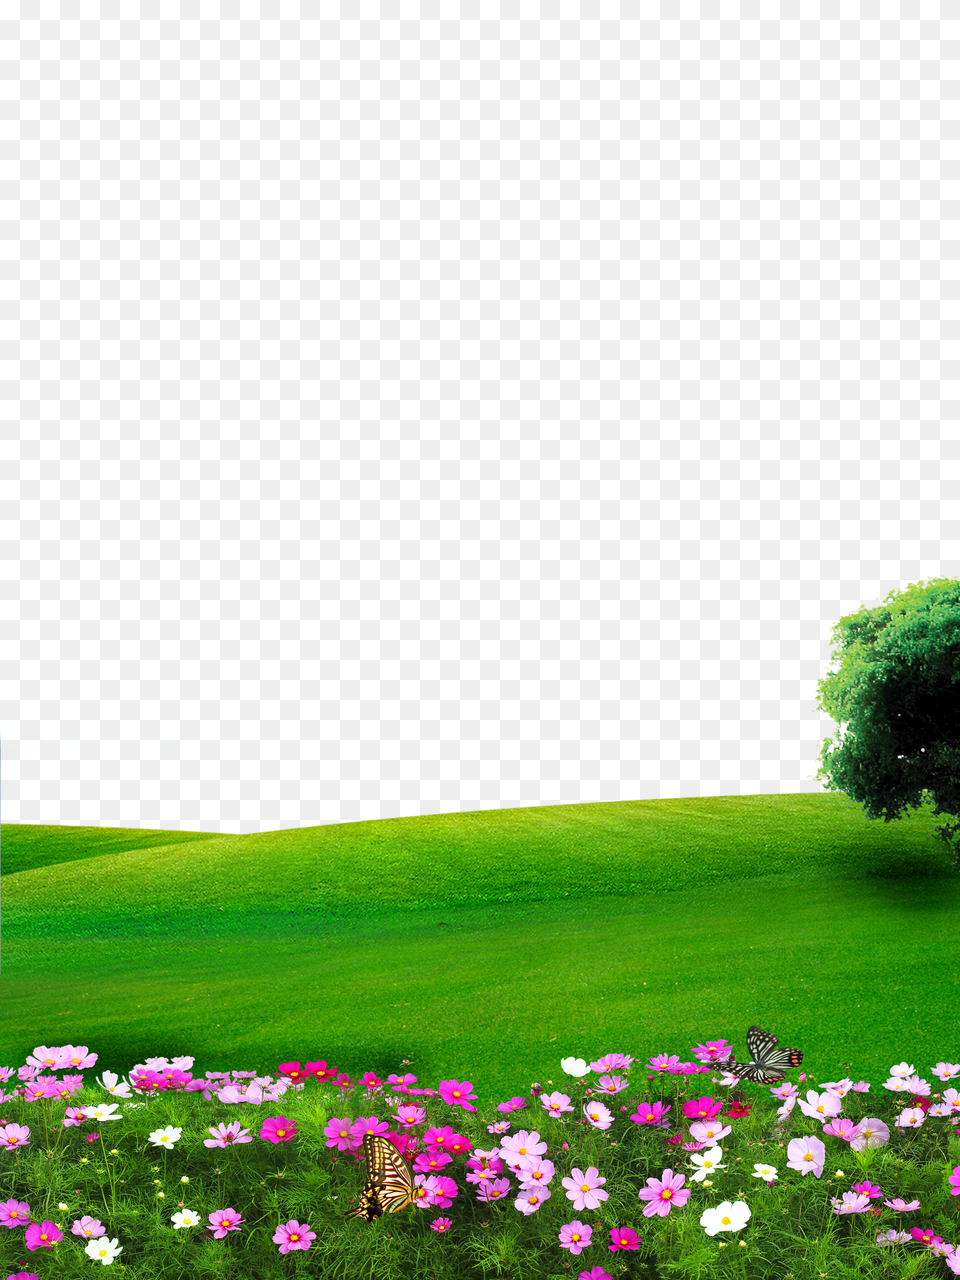 Popular And Trending Grass Field Stickers, Countryside, Rural, Plant, Outdoors Free Transparent Png